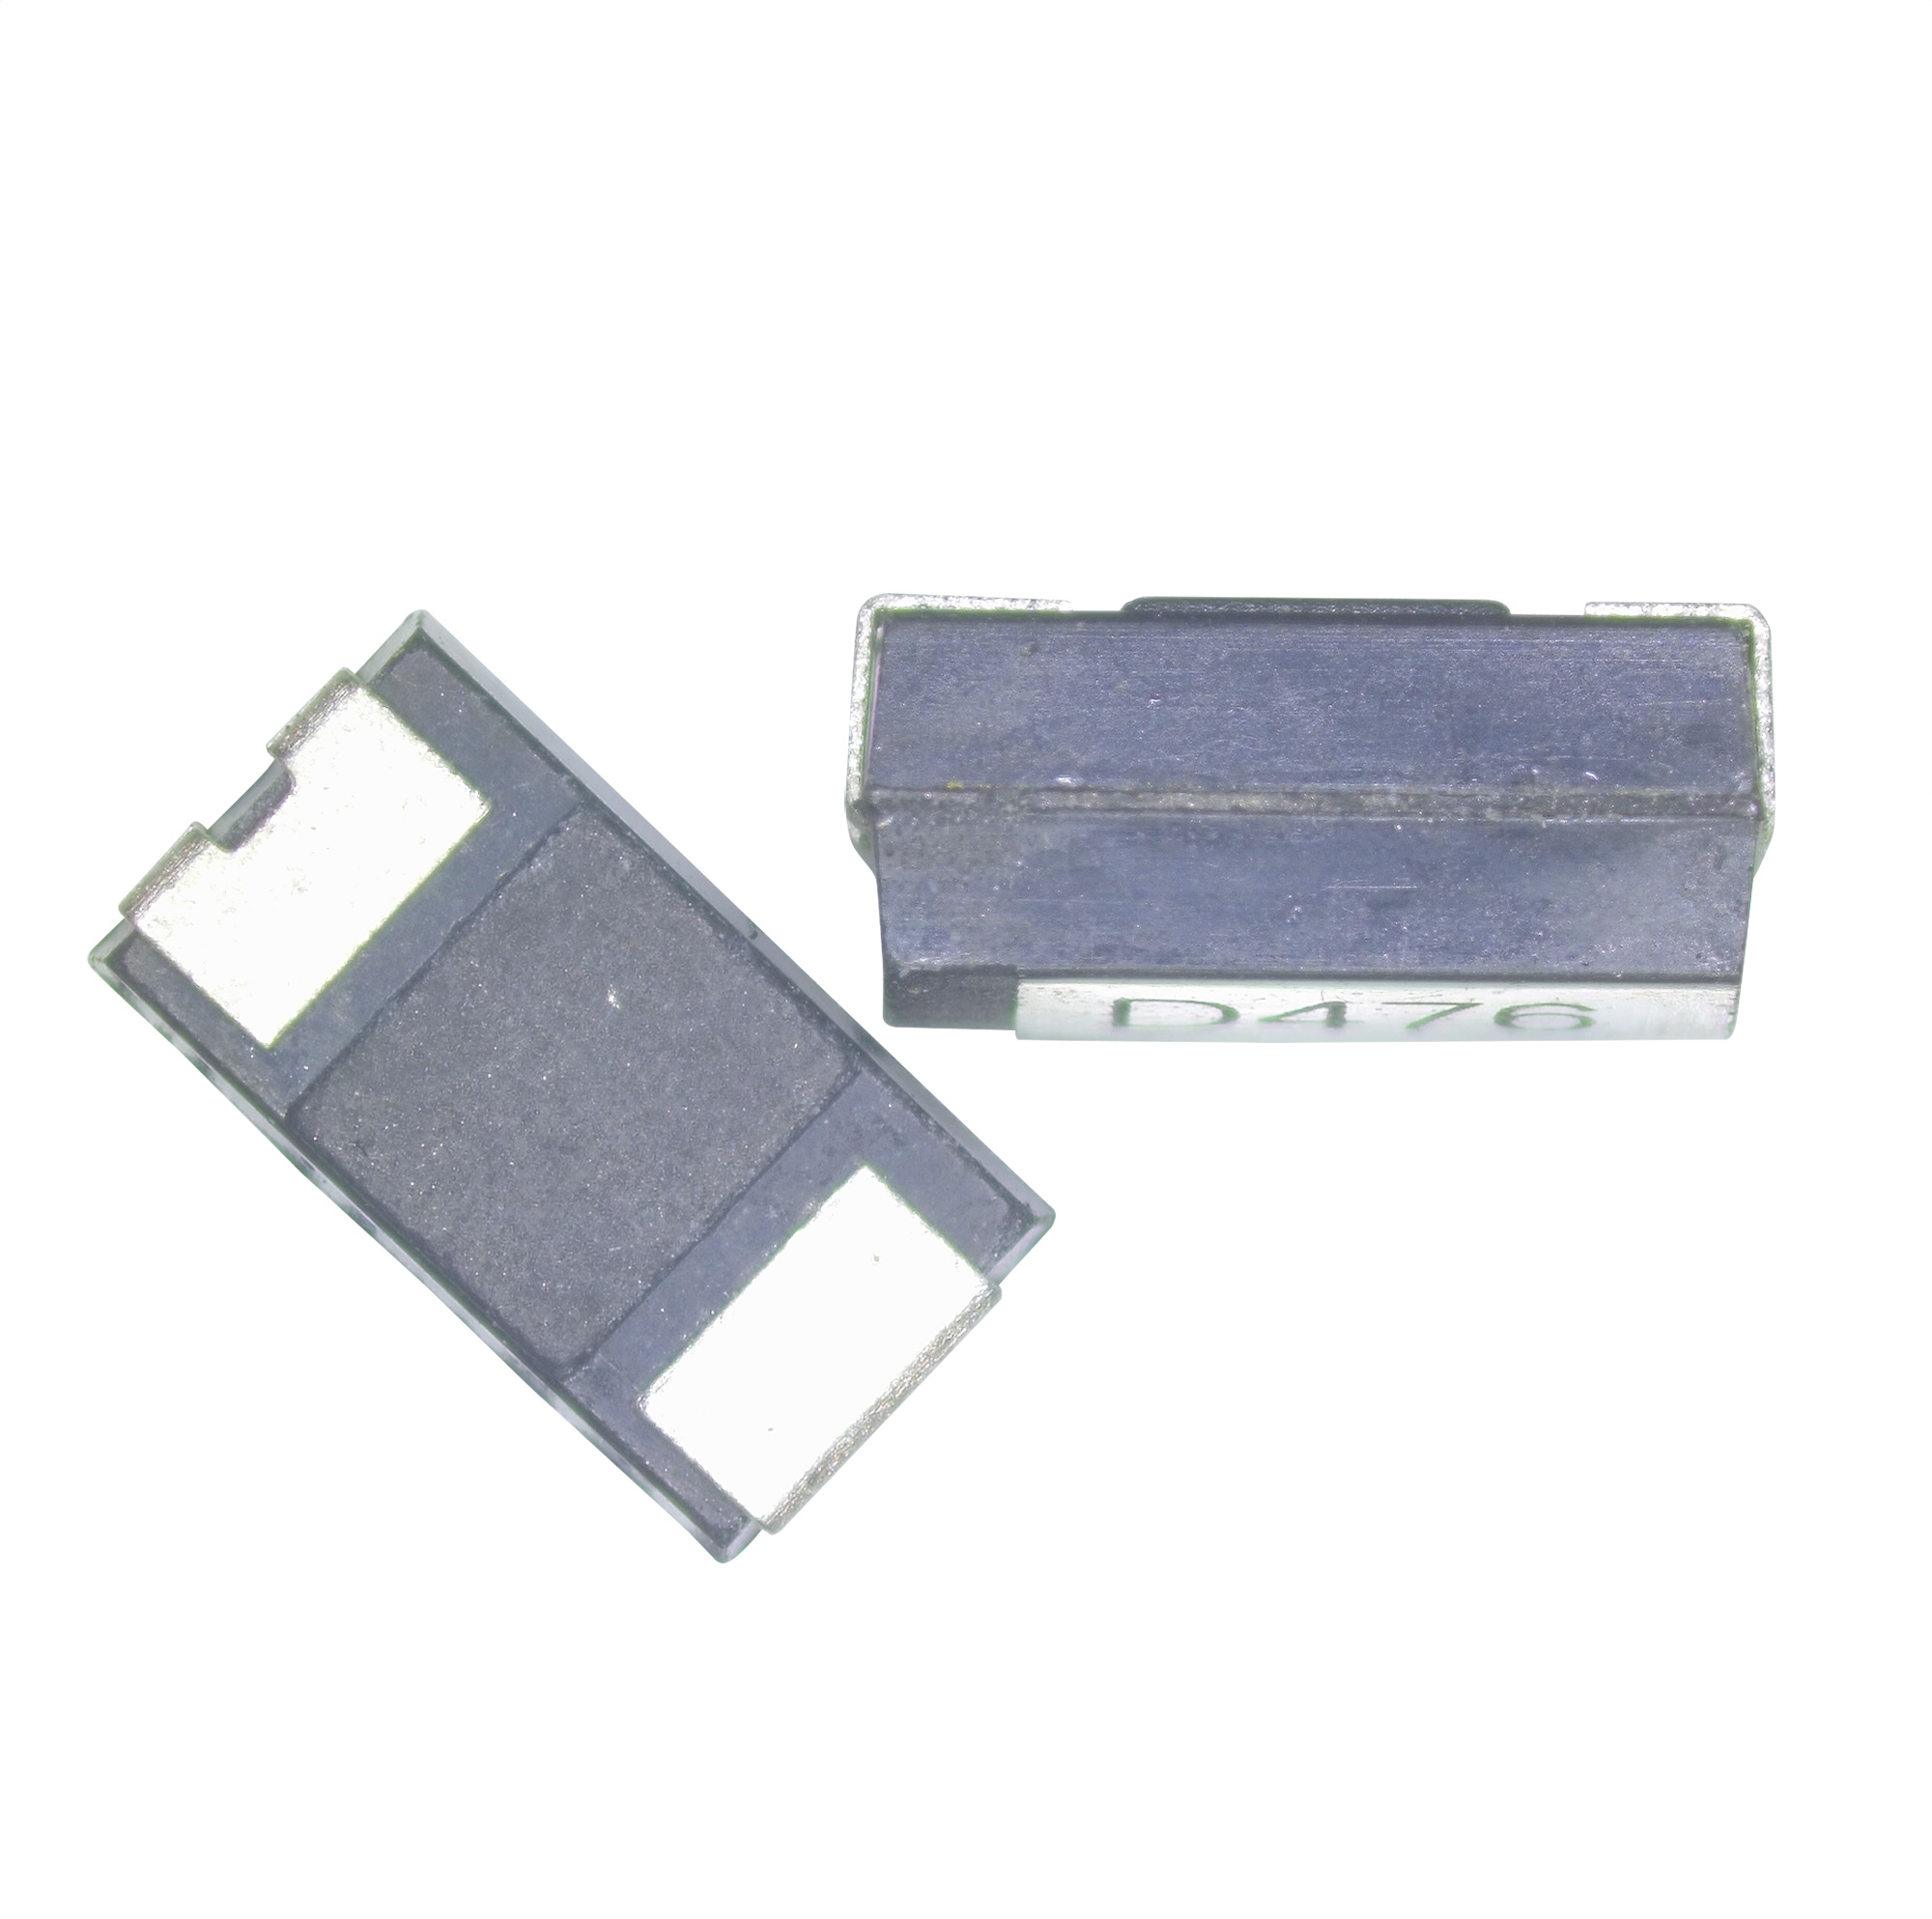 High temperature resistant chip tantalum solid electrolyte capacitor